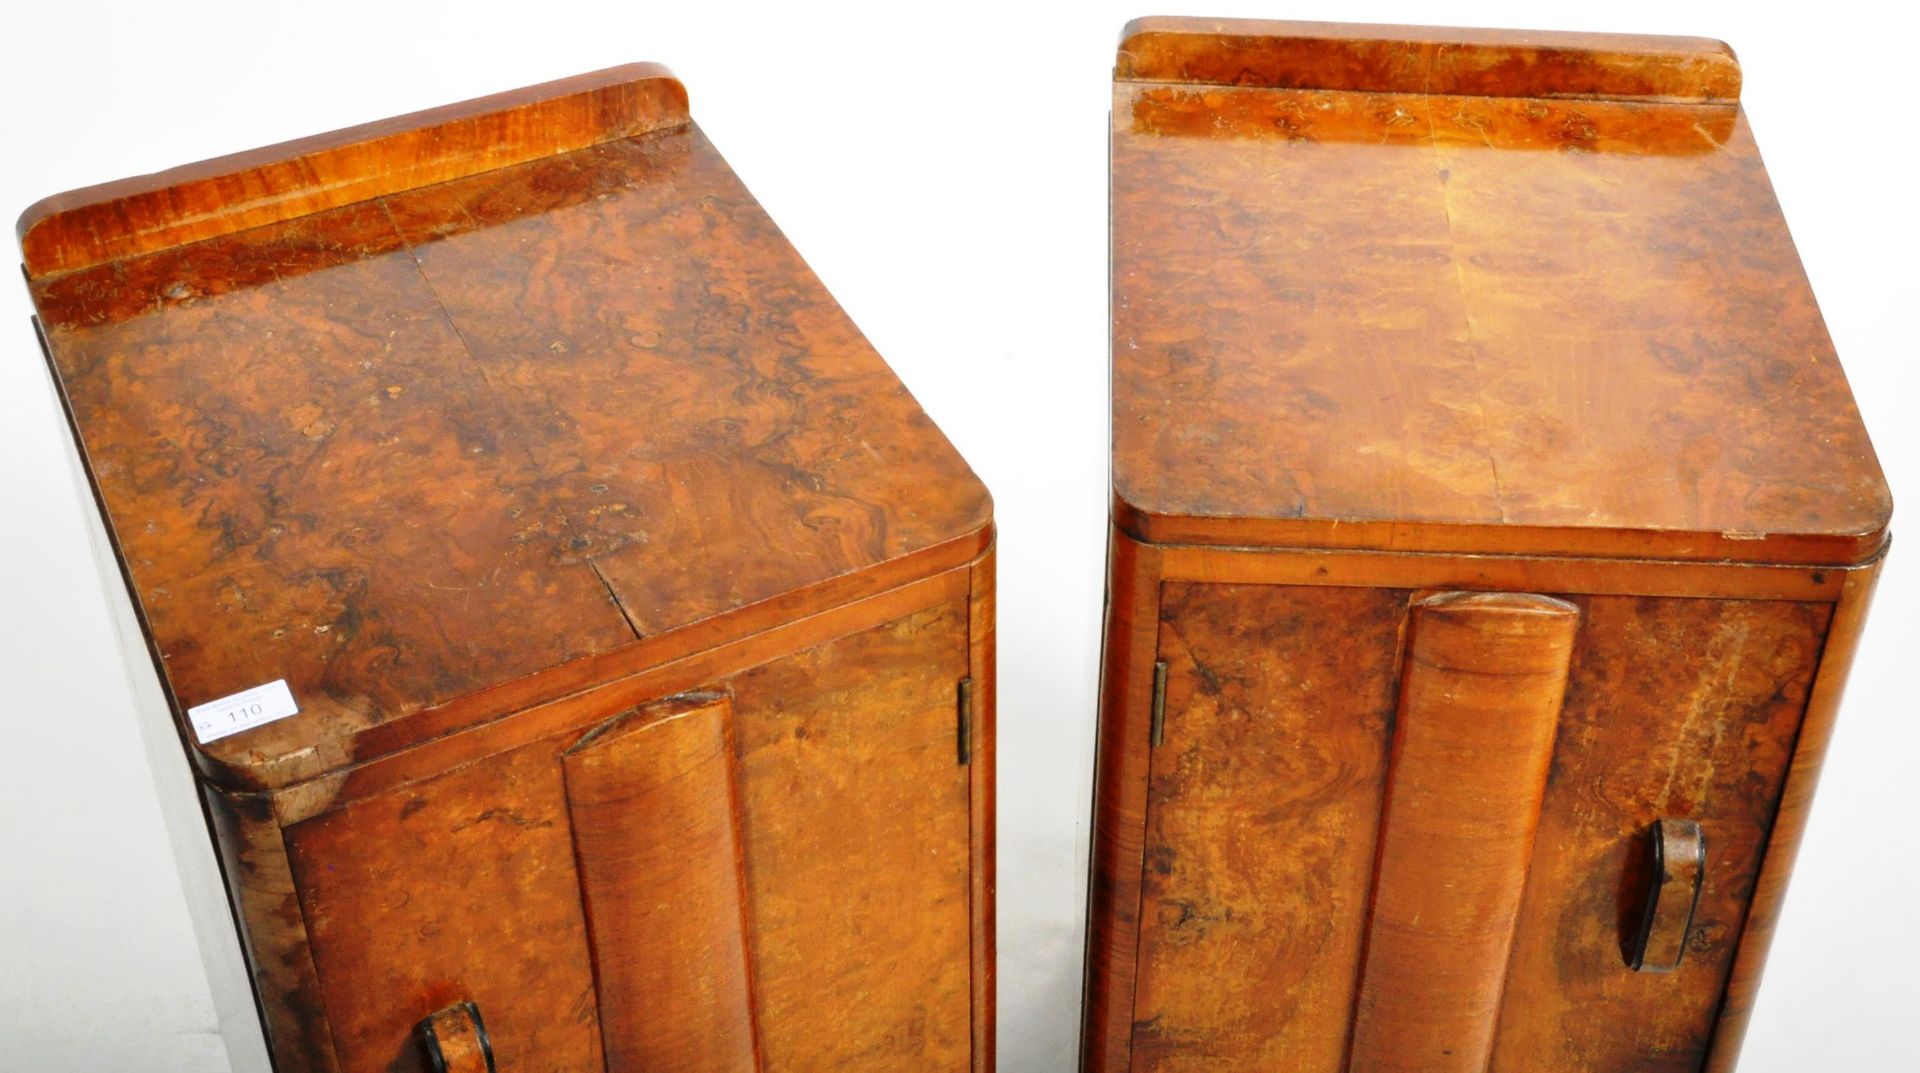 PAIR OF 1930S ART DECO WALNUT BEDSIDE TABLE CUPBOARDS - Image 3 of 7